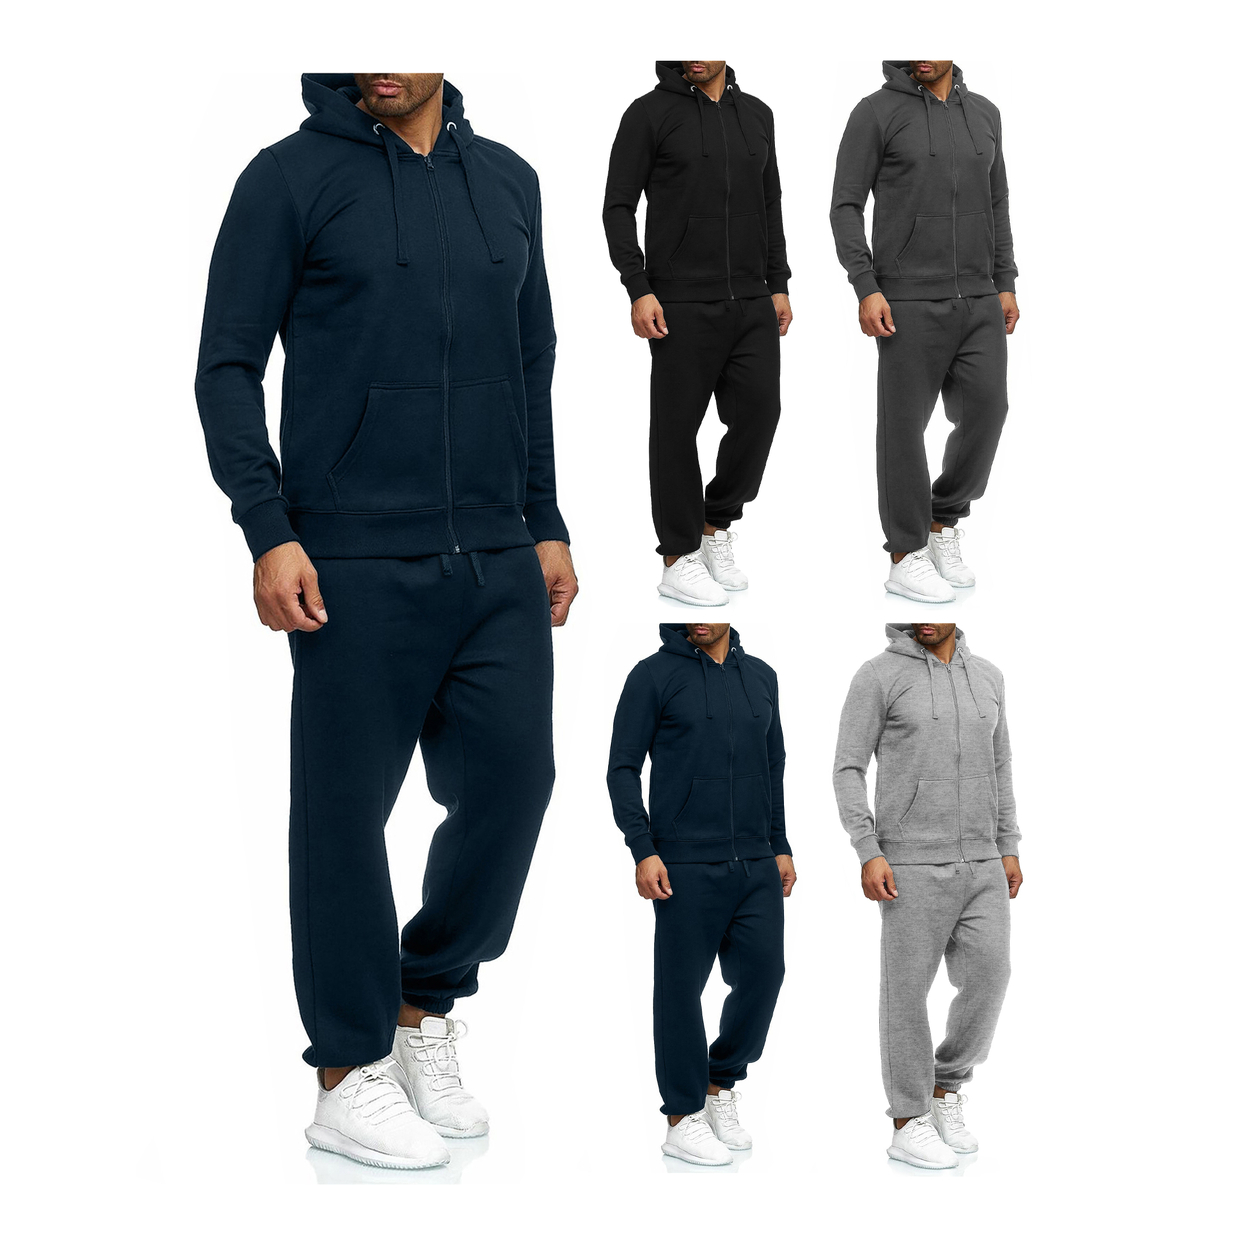 Men's Casual Big & Tall Athletic Active Winter Warm Fleece Lined Full Zip Tracksuit Jogger Set - Charcoal, Large